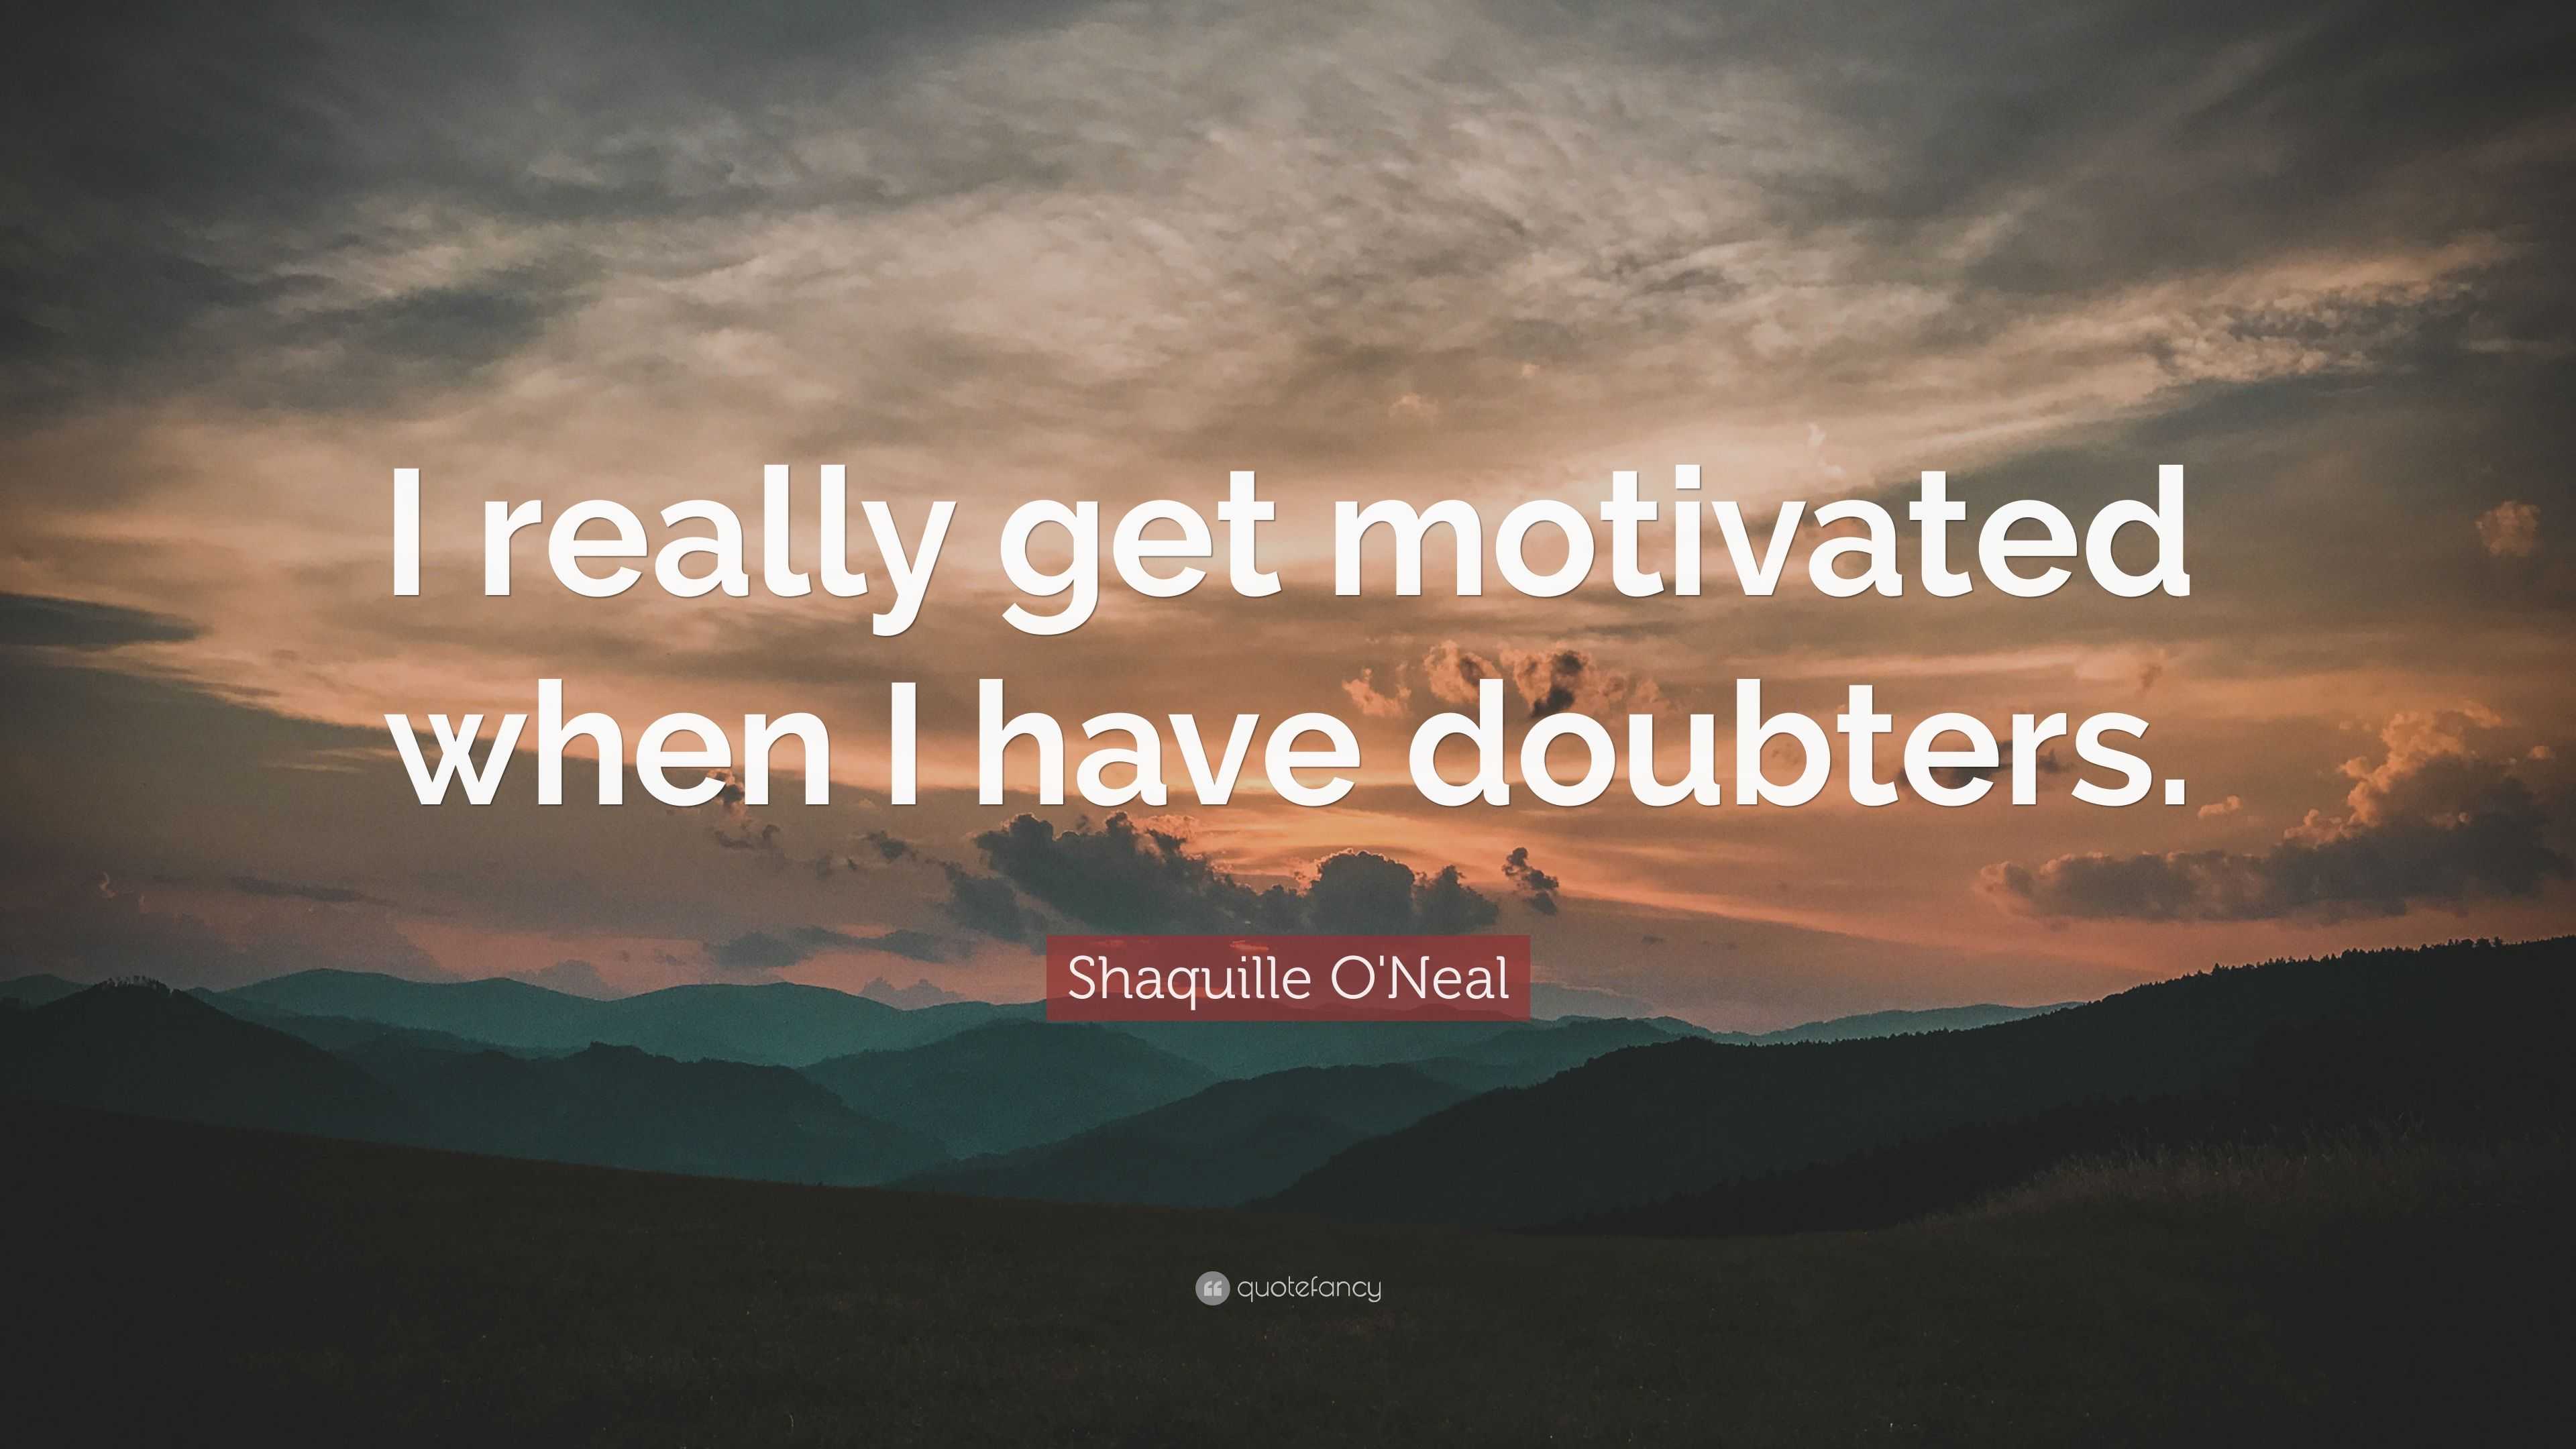 Shaquille O'Neal Quote: “I really get motivated when I have doubters